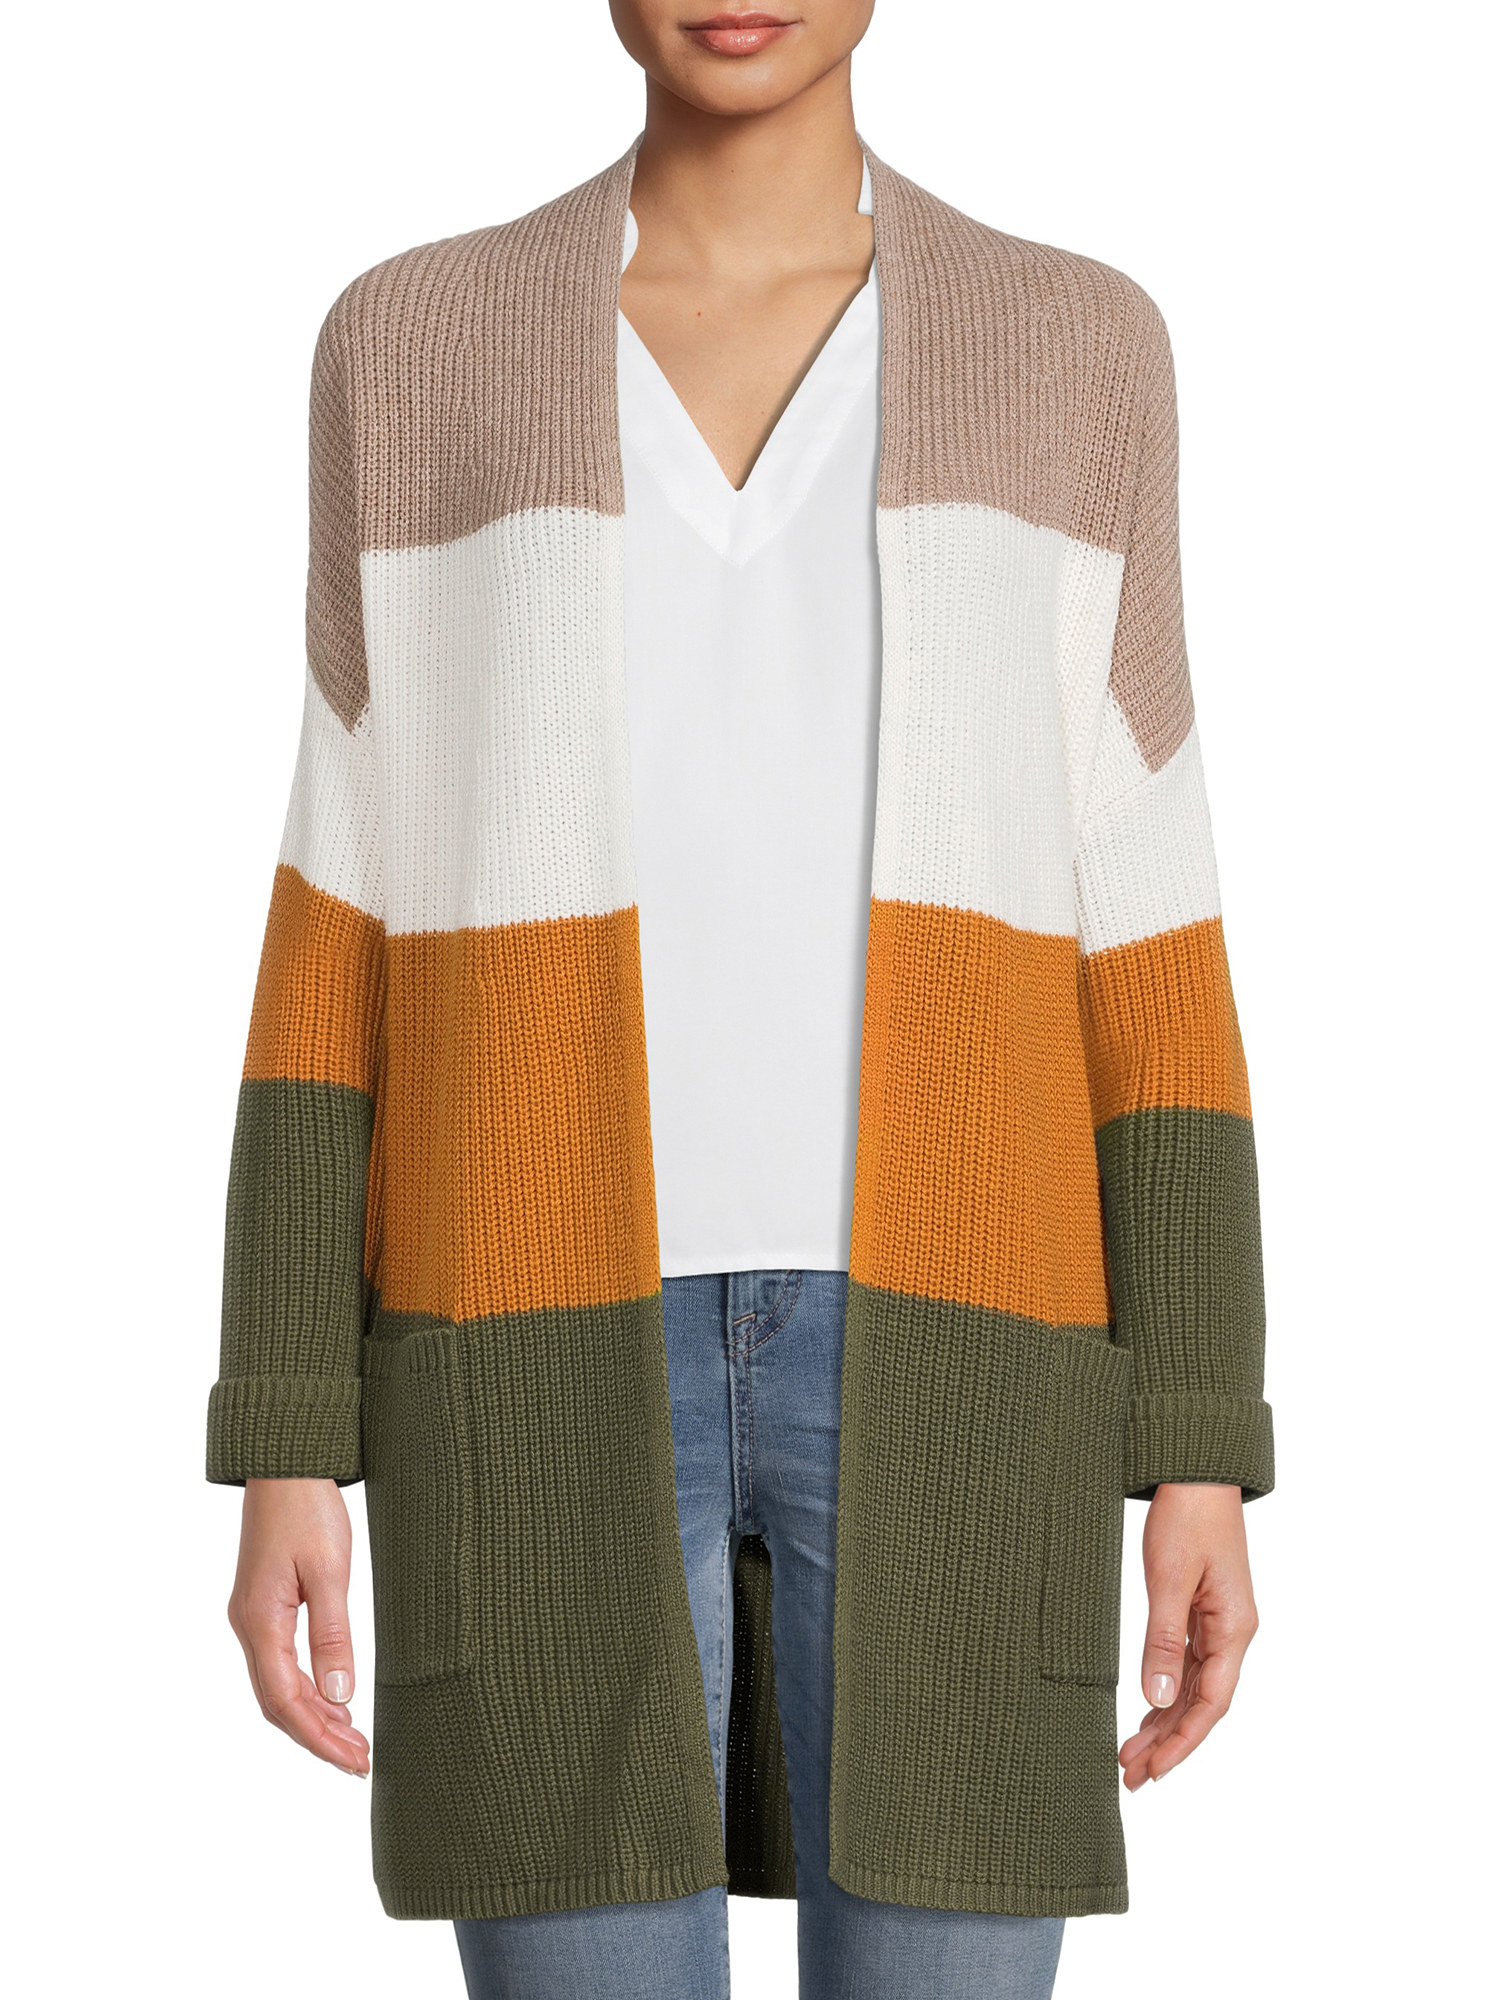 Model wearing the striped sweater in green, orange, brown, and white